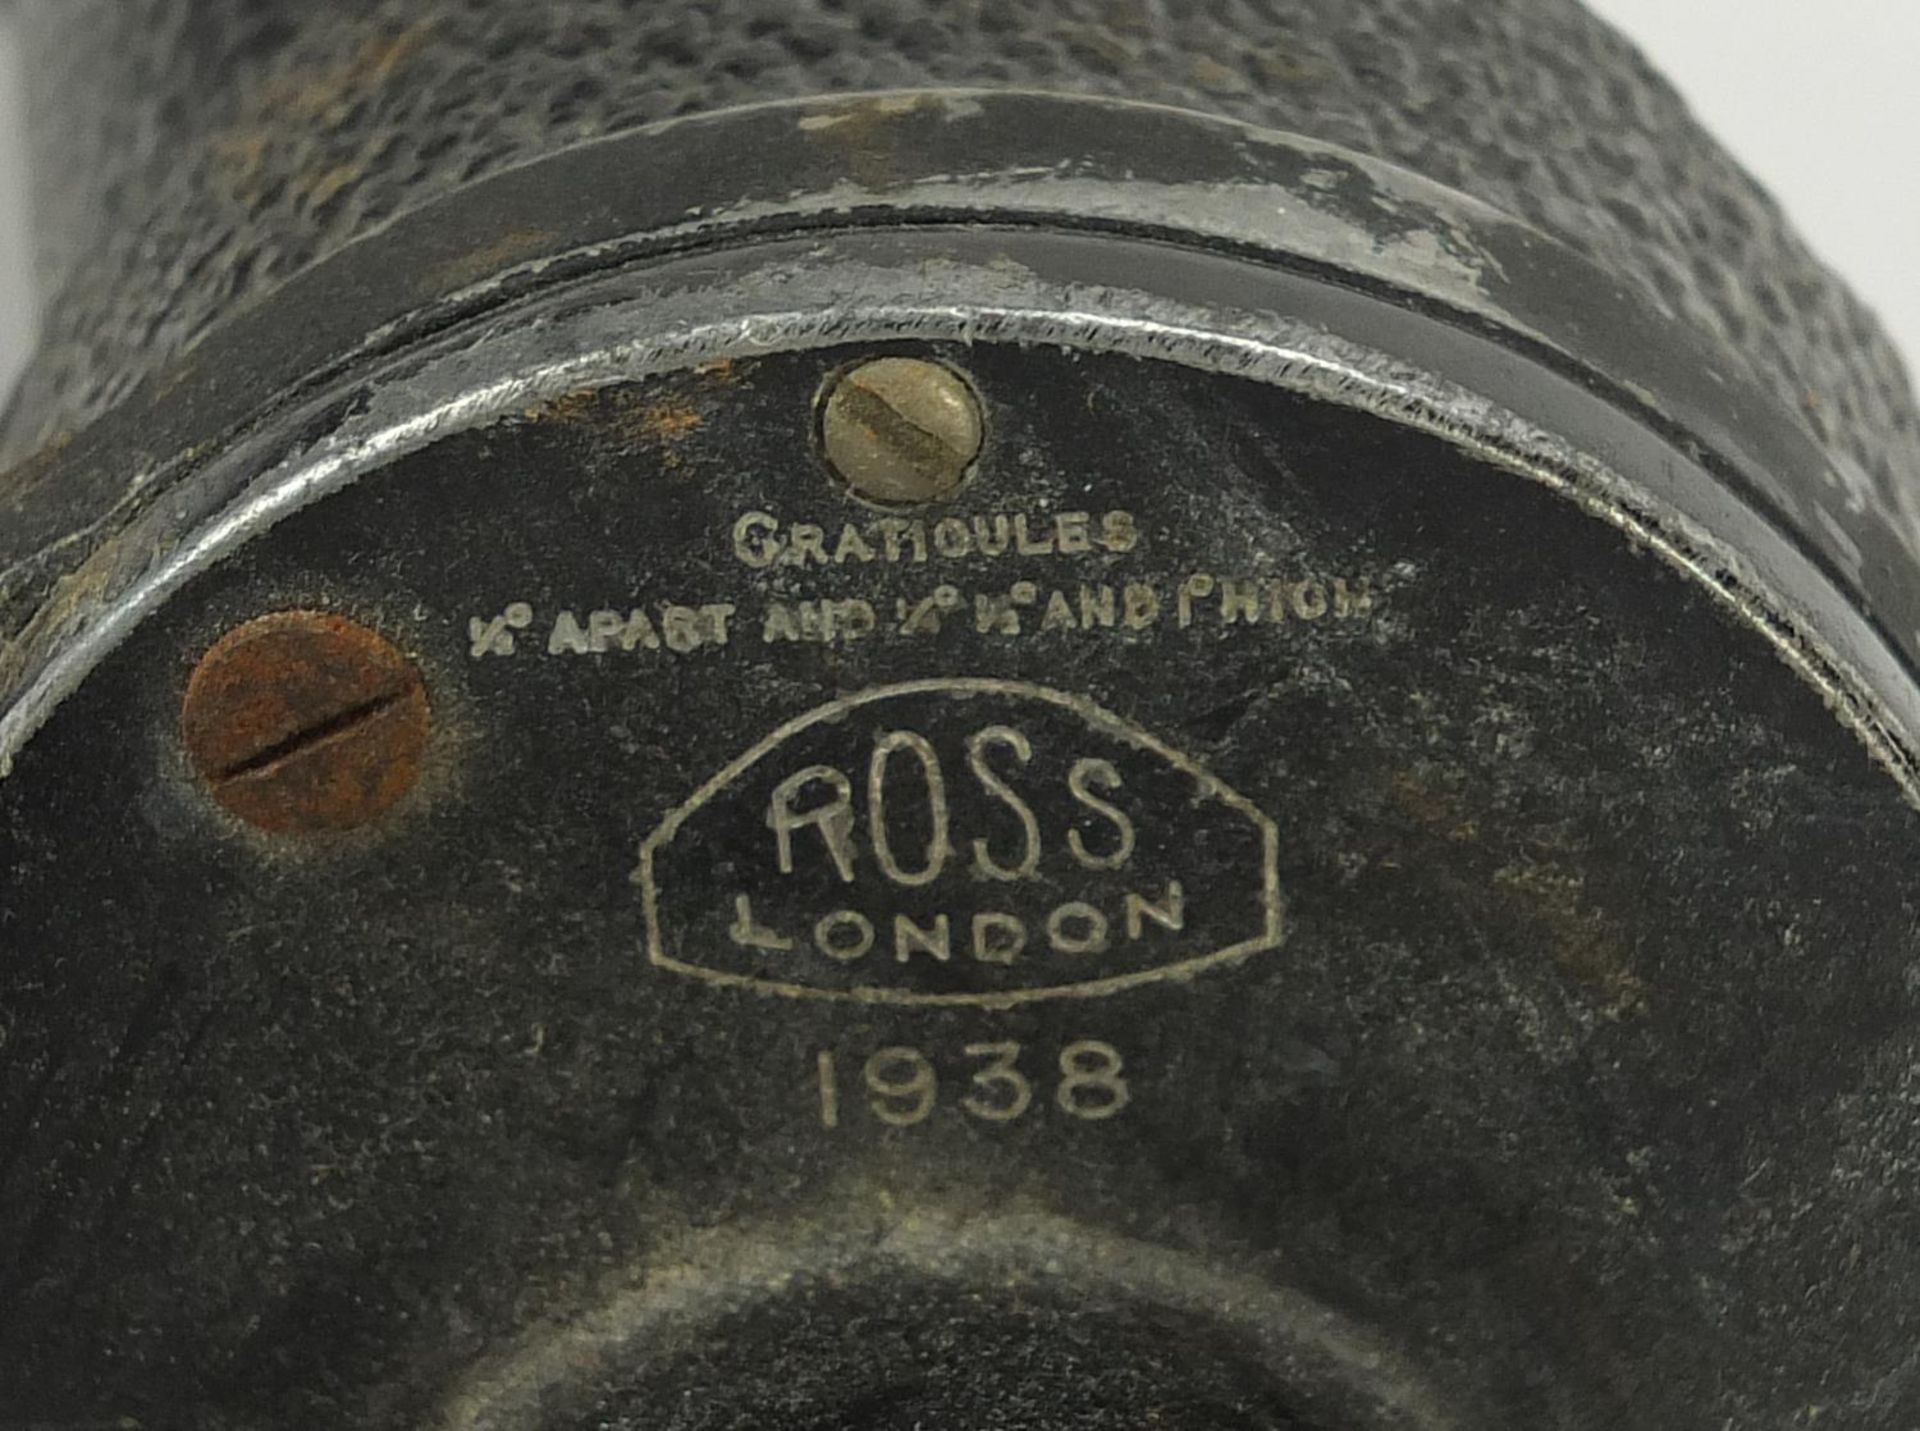 Pair of military interest field binoculars and a Ross of London spotting scope numbered 1938, the - Image 3 of 3